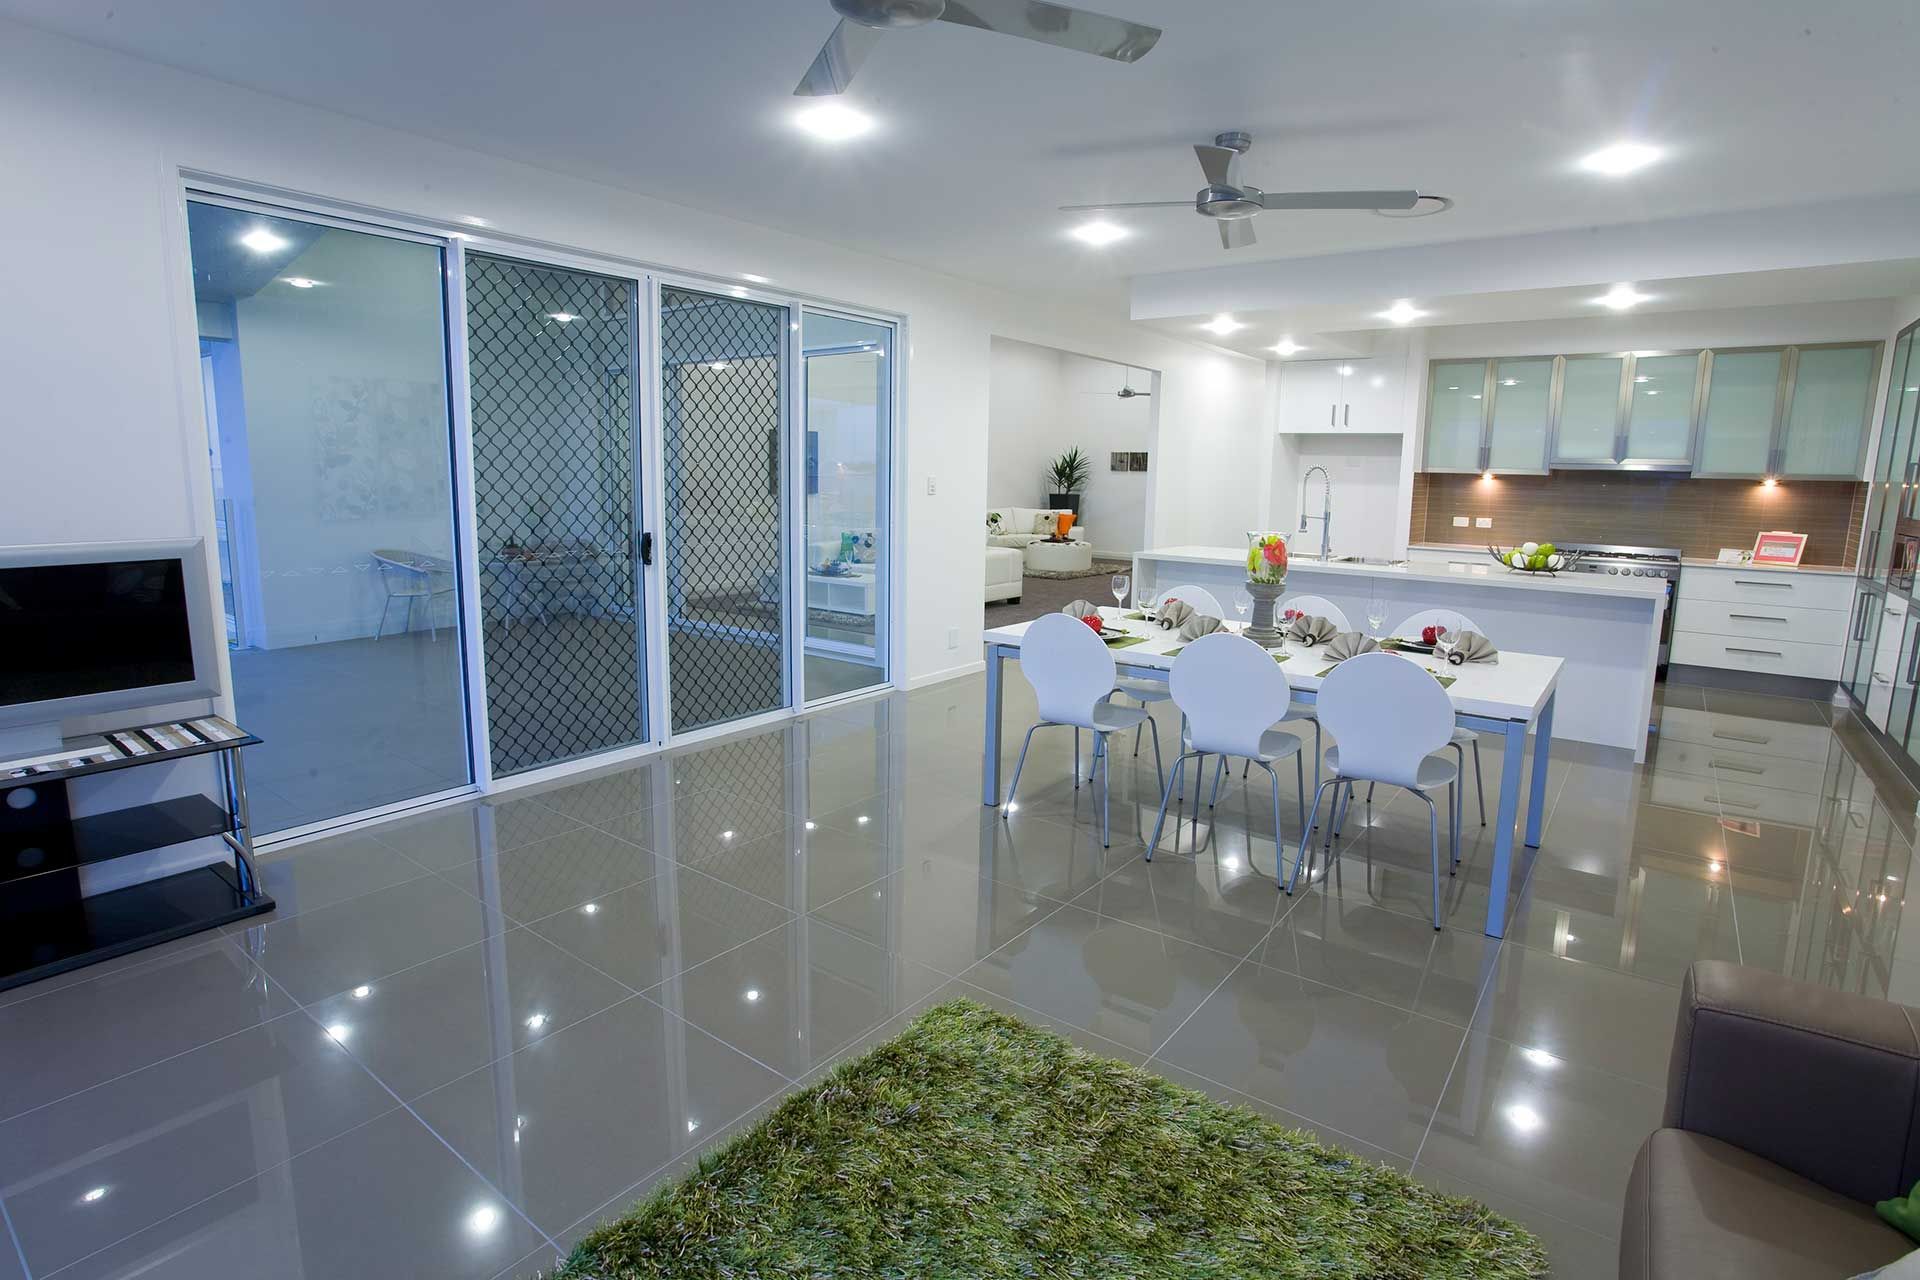 Contractors Renovating the Kitchen-Hervey Bay, QLD - Wide Bay Design Drafting